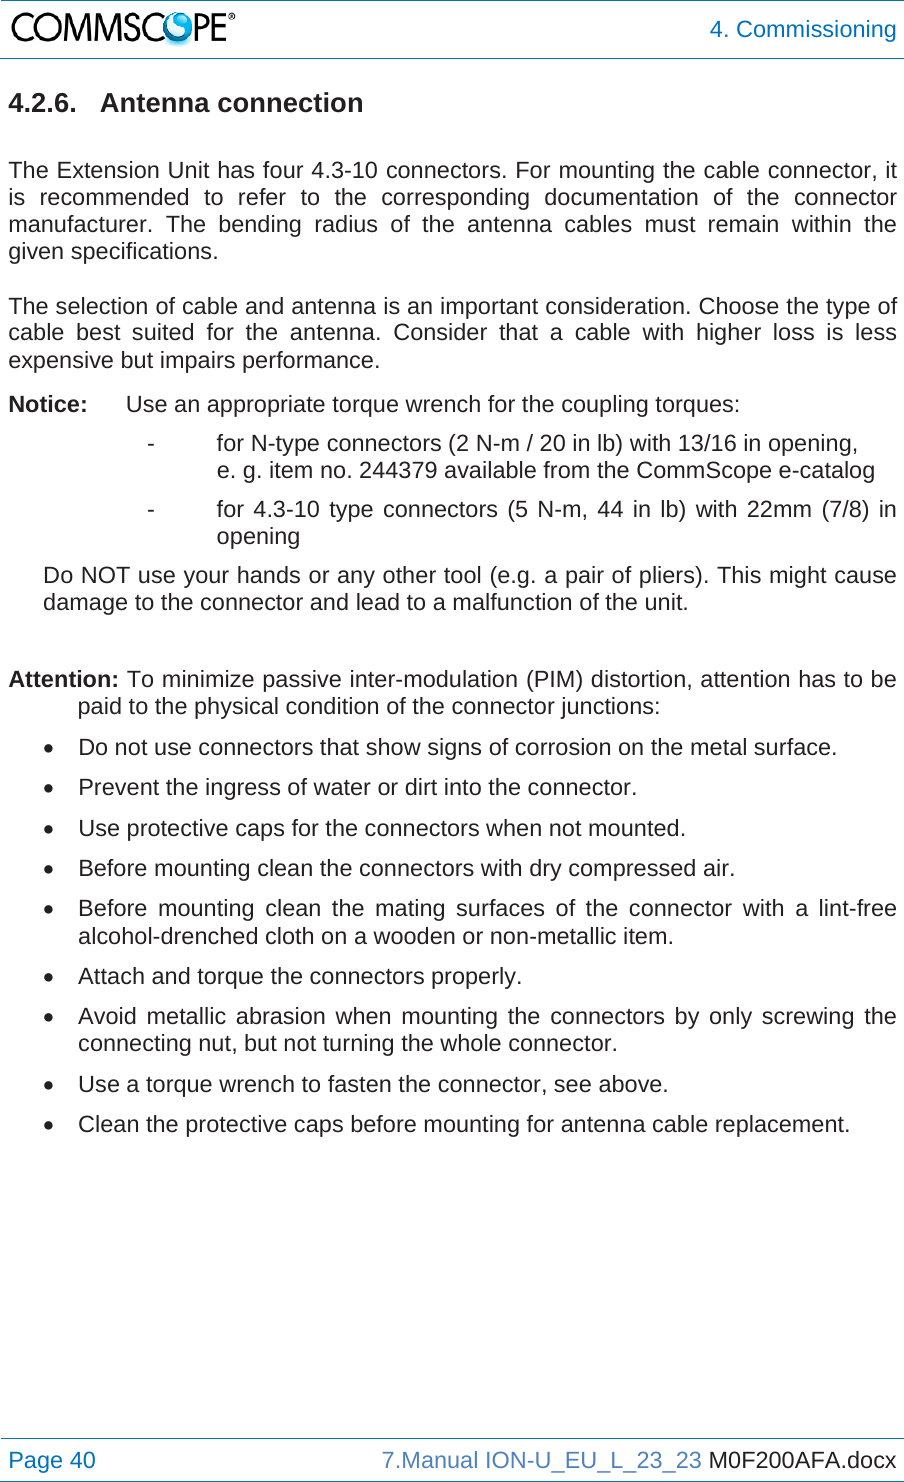  4. Commissioning Page 40  7.Manual ION-U_EU_L_23_23 M0F200AFA.docx  4.2.6. Antenna connection  The Extension Unit has four 4.3-10 connectors. For mounting the cable connector, it is recommended to refer to the corresponding documentation of the connector manufacturer. The bending radius of the antenna cables must remain within the given specifications.   The selection of cable and antenna is an important consideration. Choose the type of cable best suited for the antenna. Consider that a cable with higher loss is less expensive but impairs performance.  Notice:  Use an appropriate torque wrench for the coupling torques: -  for N-type connectors (2 N-m / 20 in lb) with 13/16 in opening,    e. g. item no. 244379 available from the CommScope e-catalog -  for 4.3-10 type connectors (5 N-m, 44 in lb) with 22mm (7/8) in opening Do NOT use your hands or any other tool (e.g. a pair of pliers). This might cause damage to the connector and lead to a malfunction of the unit.  Attention: To minimize passive inter-modulation (PIM) distortion, attention has to be paid to the physical condition of the connector junctions:   Do not use connectors that show signs of corrosion on the metal surface.   Prevent the ingress of water or dirt into the connector.   Use protective caps for the connectors when not mounted.   Before mounting clean the connectors with dry compressed air.   Before mounting clean the mating surfaces of the connector with a lint-free alcohol-drenched cloth on a wooden or non-metallic item.   Attach and torque the connectors properly.   Avoid metallic abrasion when mounting the connectors by only screwing the connecting nut, but not turning the whole connector.   Use a torque wrench to fasten the connector, see above.   Clean the protective caps before mounting for antenna cable replacement.    